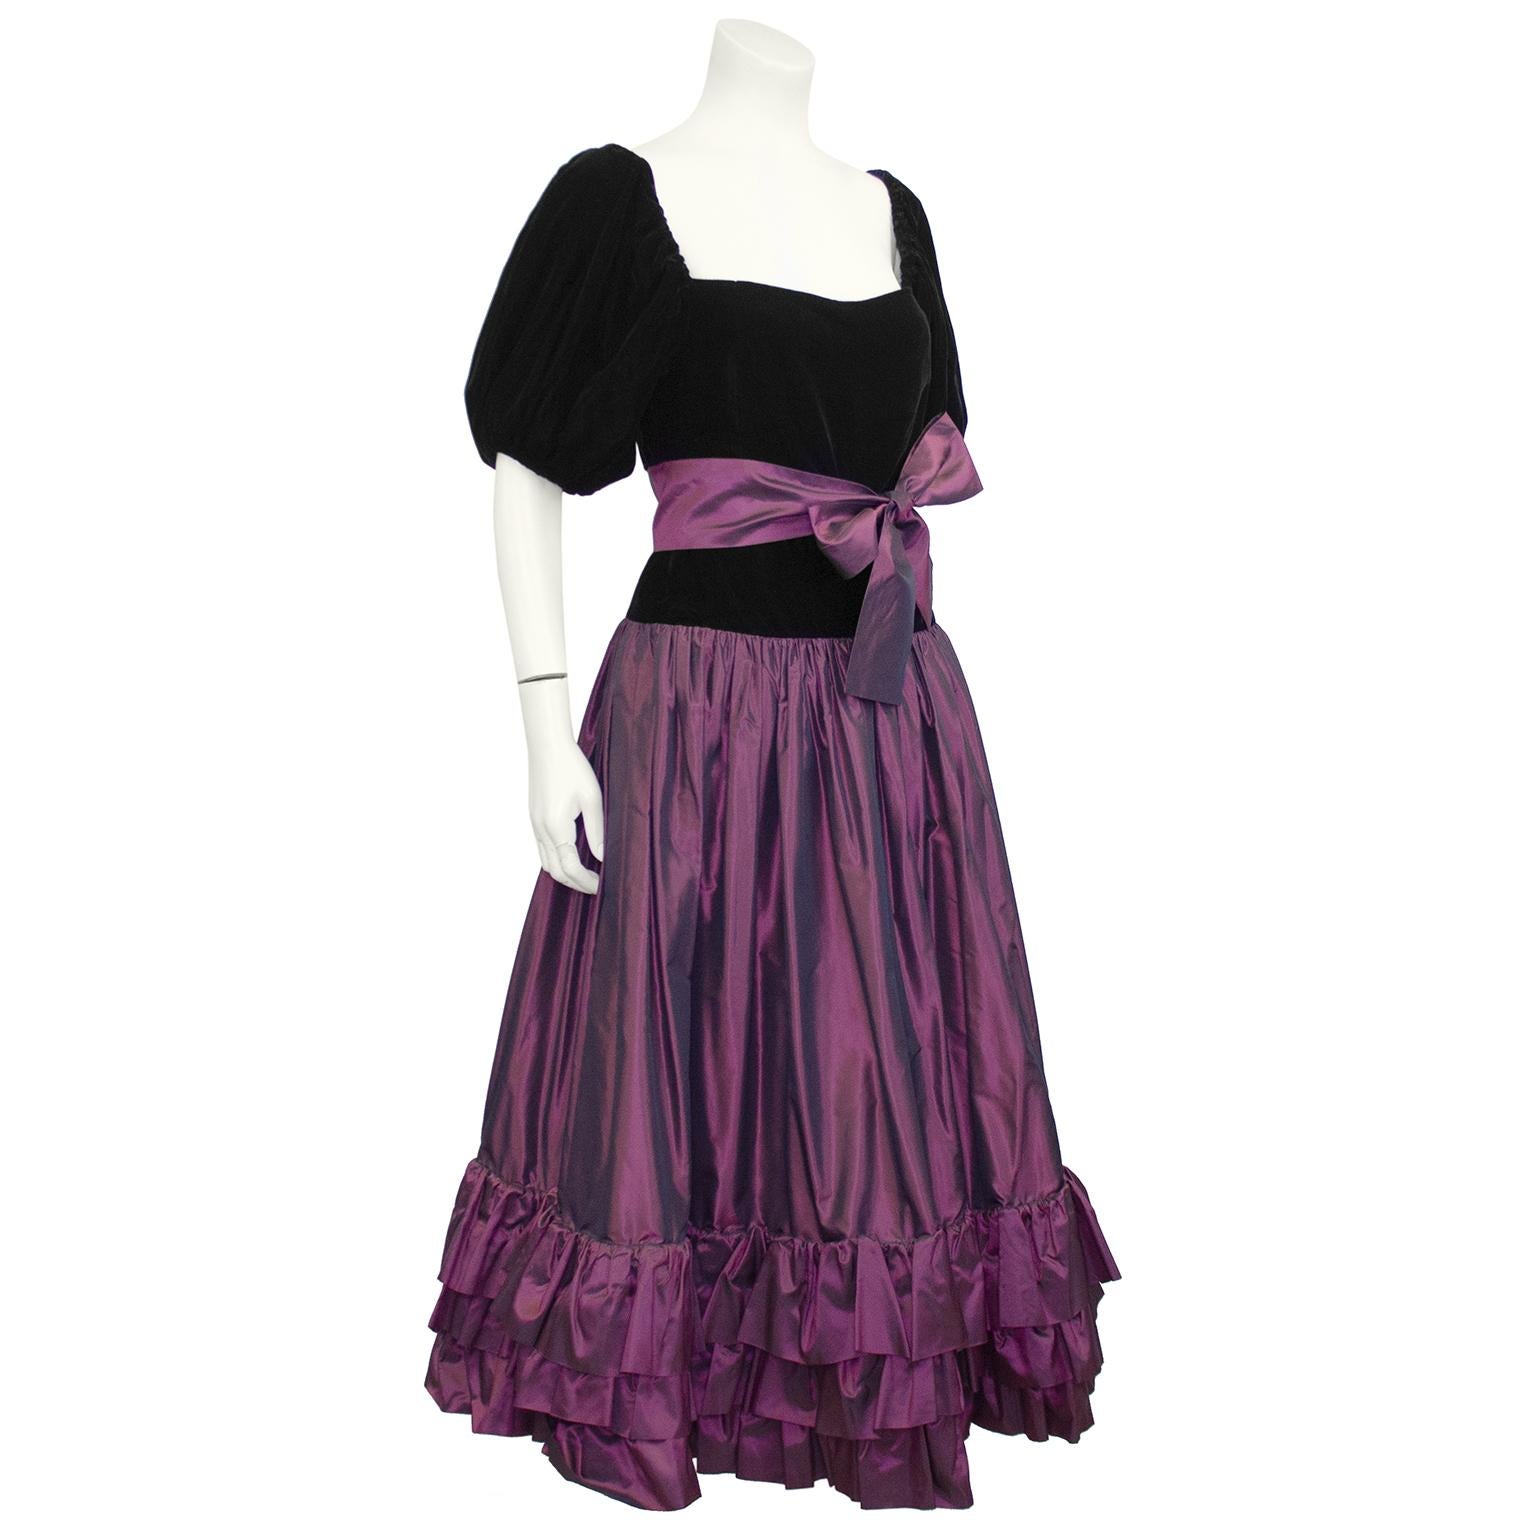 YSL Rive Gauche black velvet and purple taffeta skirt ensemble from 1981. The velvet top has short puff sleeves, a square neckline and is fitted through the body down to the hips. The purple taffeta skirt has a black velvet yoke at the top which